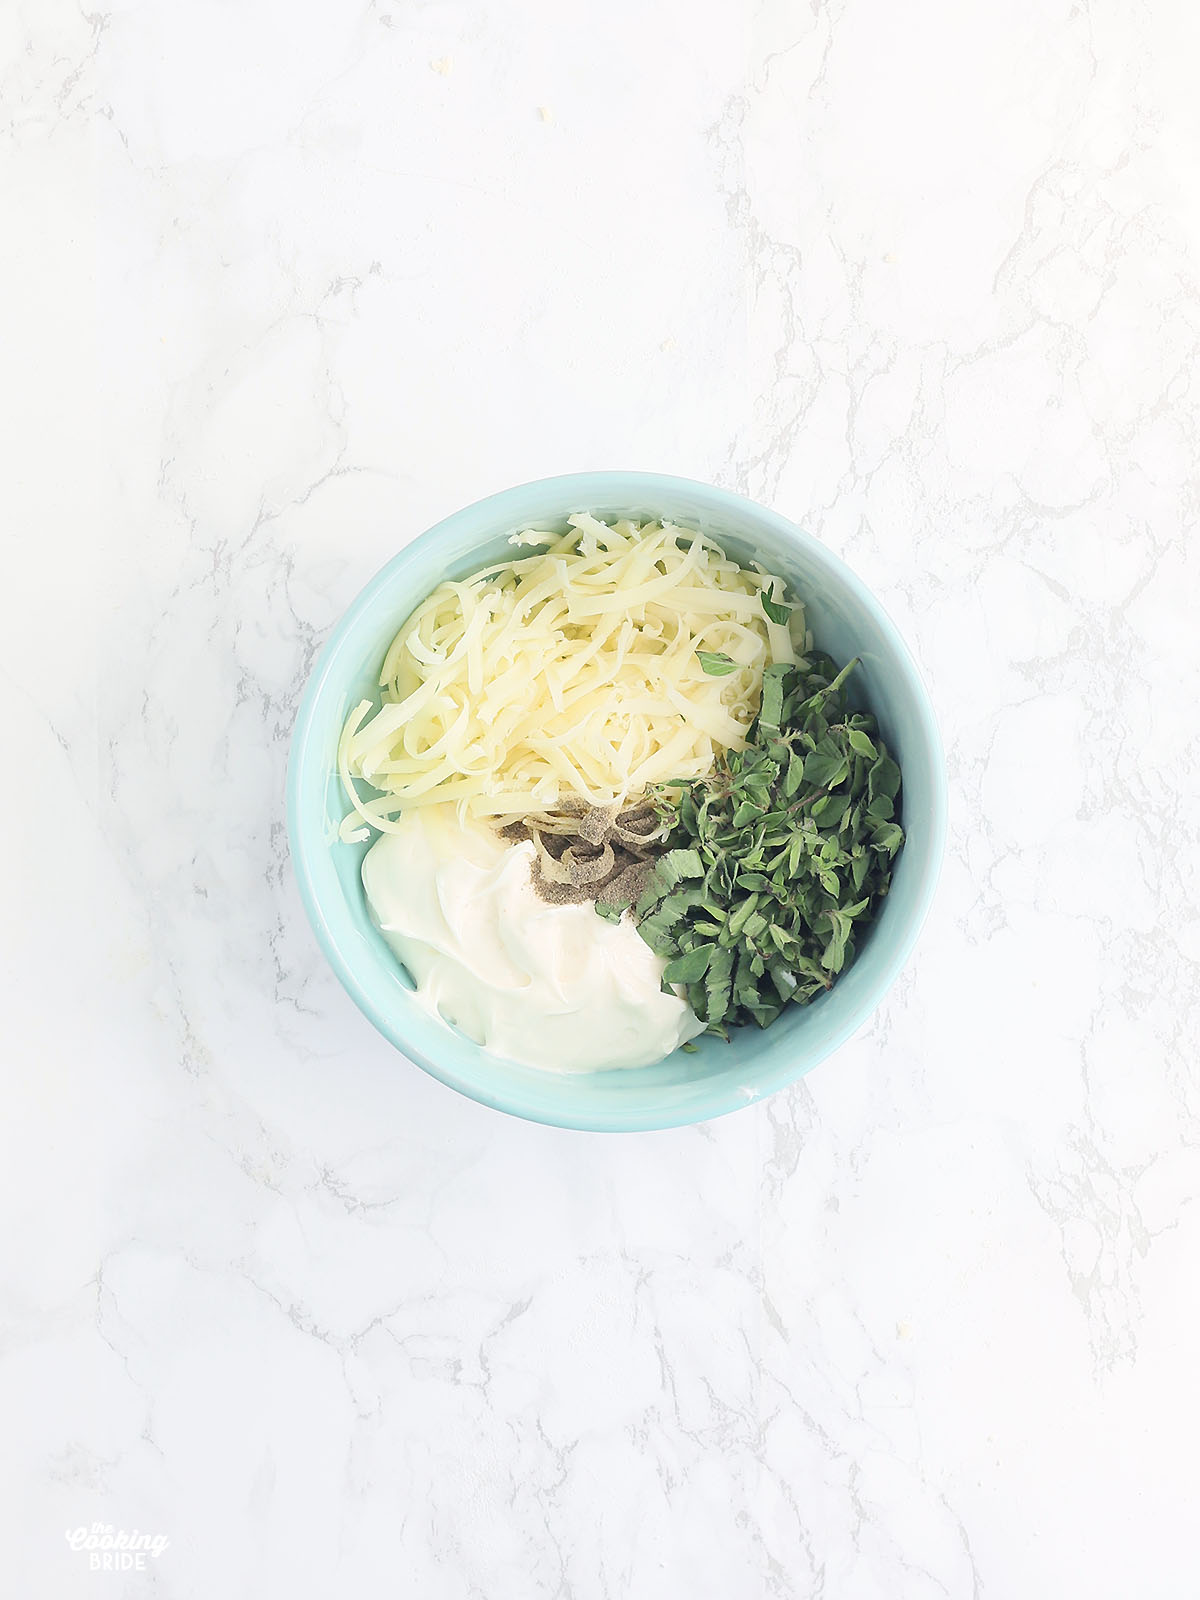 cheese, mayo and fresh herbs in a blue bowl